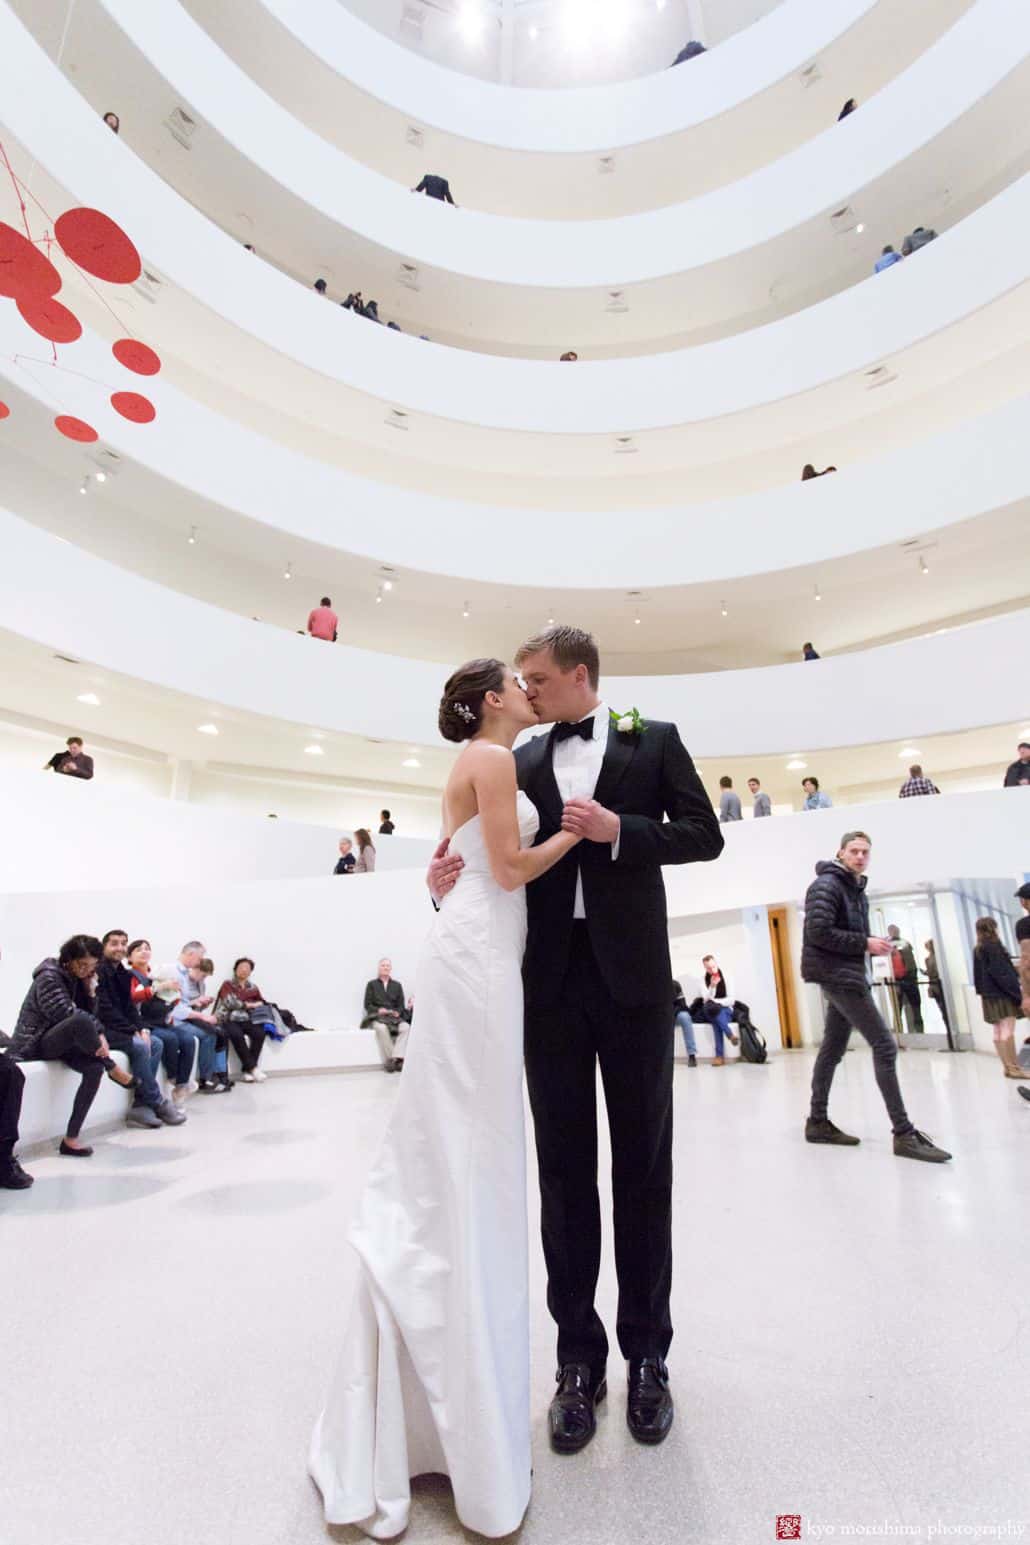 Light-hearted portrait session of a groom and bride kissing and standing in the middle of a white building's ground floor, and they are surrounded by people, photographed by wedding photographer in central NJ Kyo Morishima.